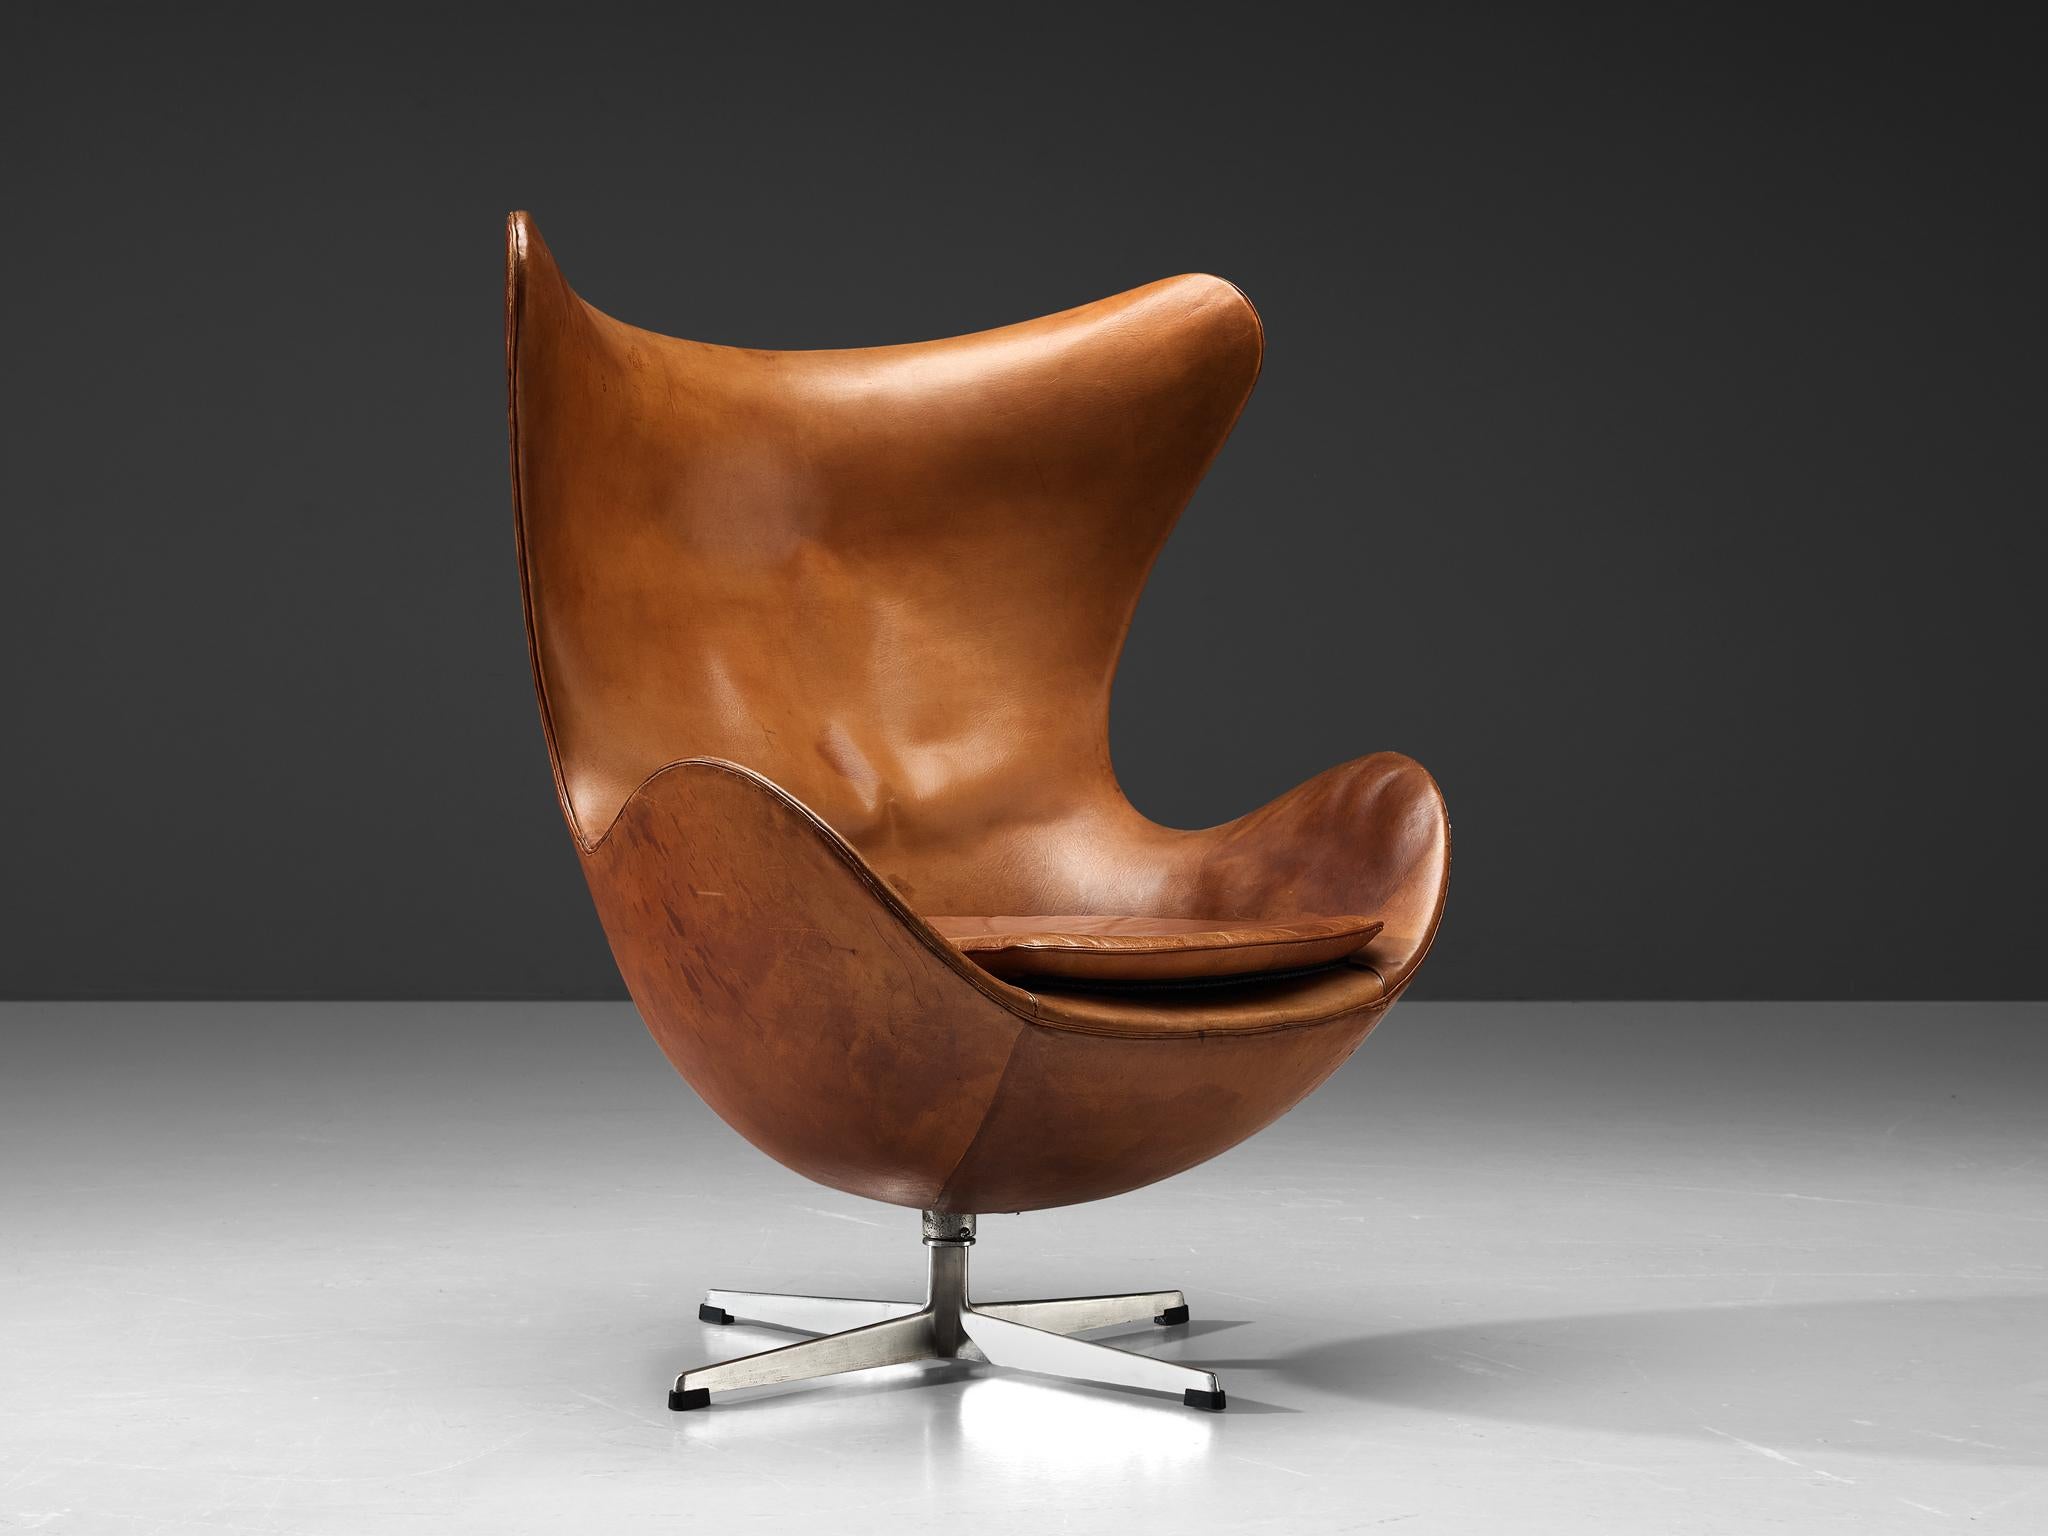 Arne Jacobsen for Fritz Hansen, early 'egg' lounge chair 3316, leather, steel, Denmark, design 1958, produced 1959

This chair is one of the most iconic designs in the history of Danish design. This chair was originally designed for the SAS Hotel